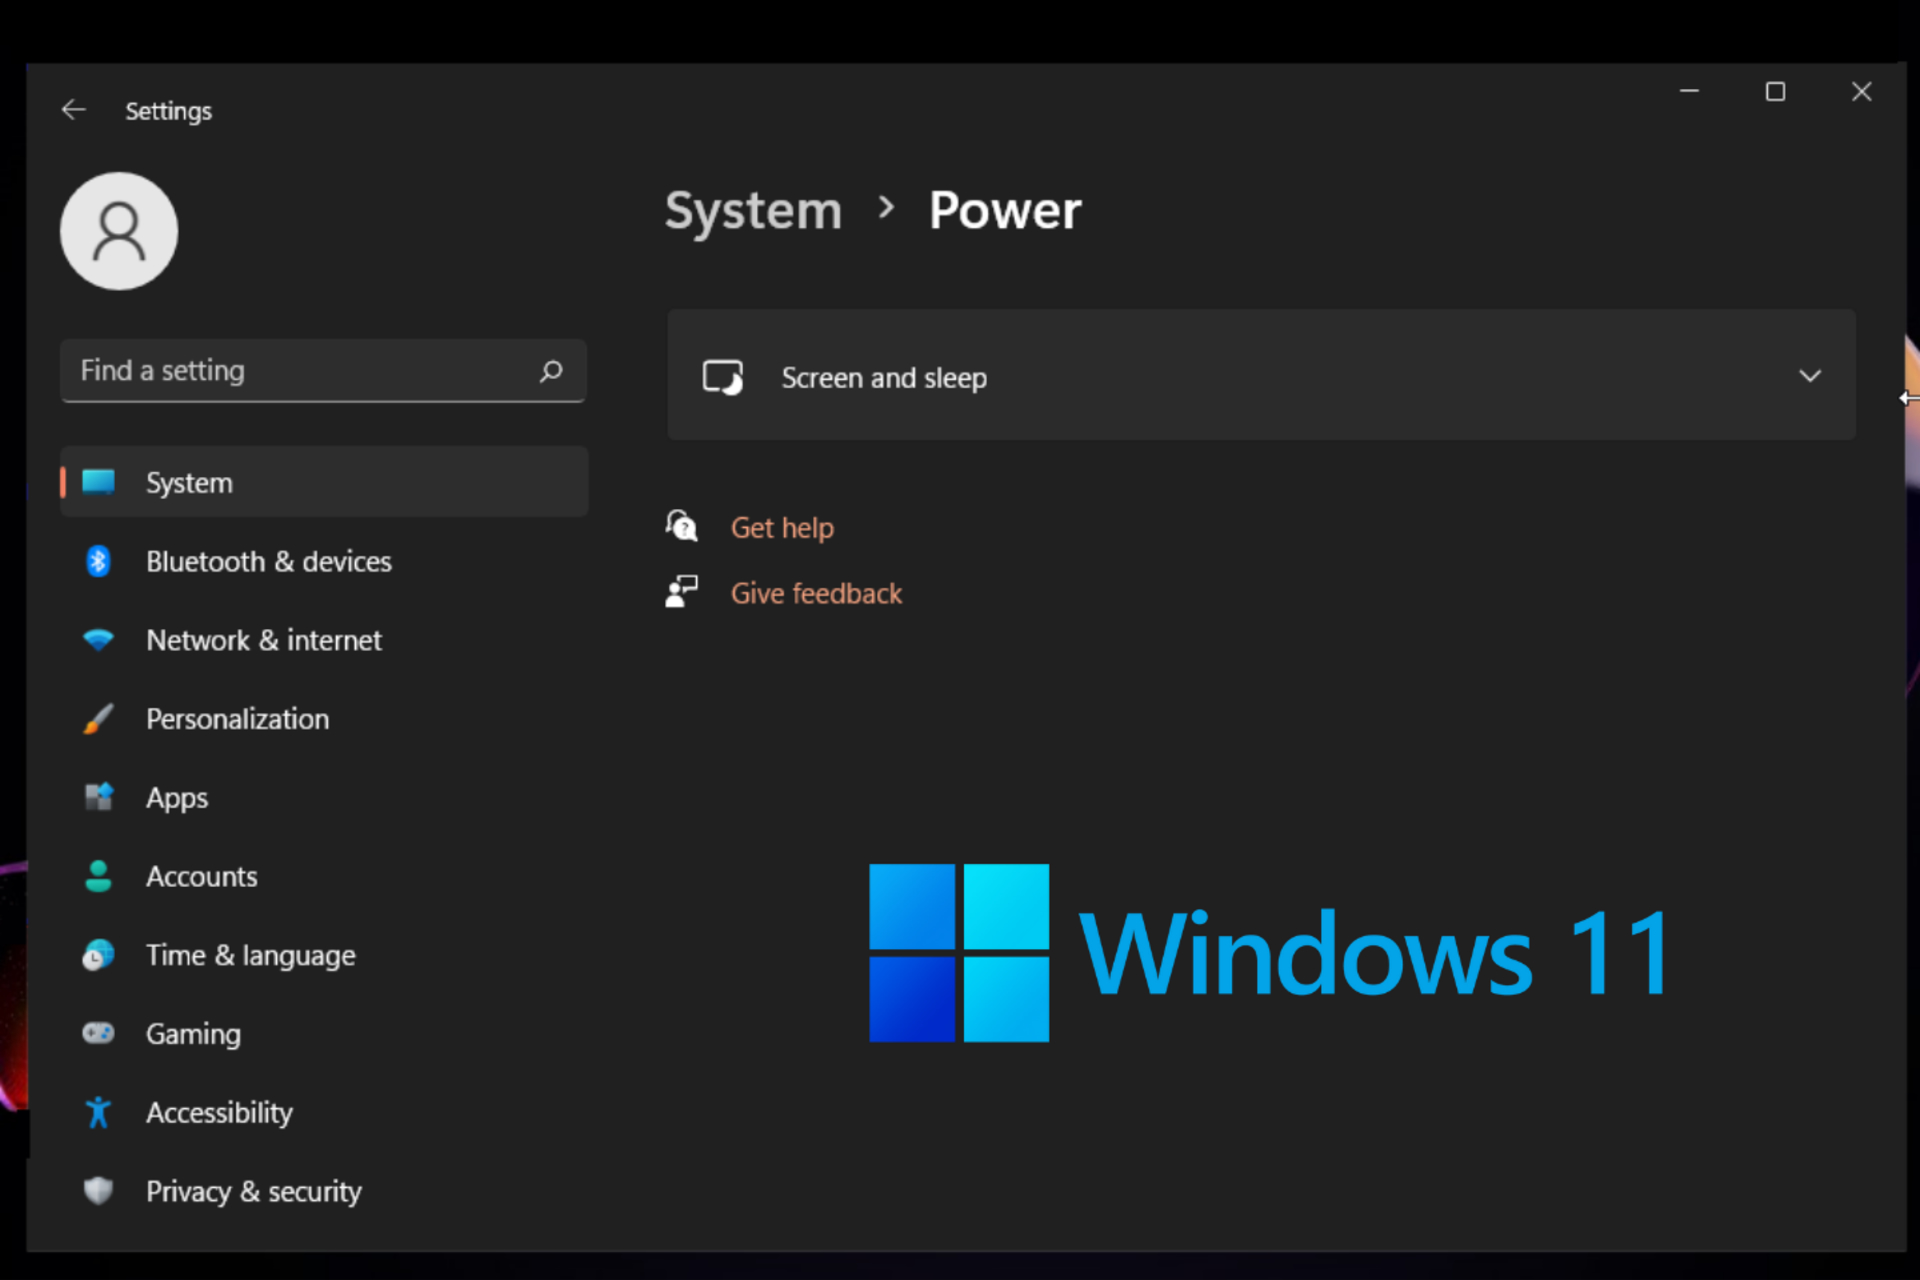 Power settings are missing in Windows 11: Fix it with ease